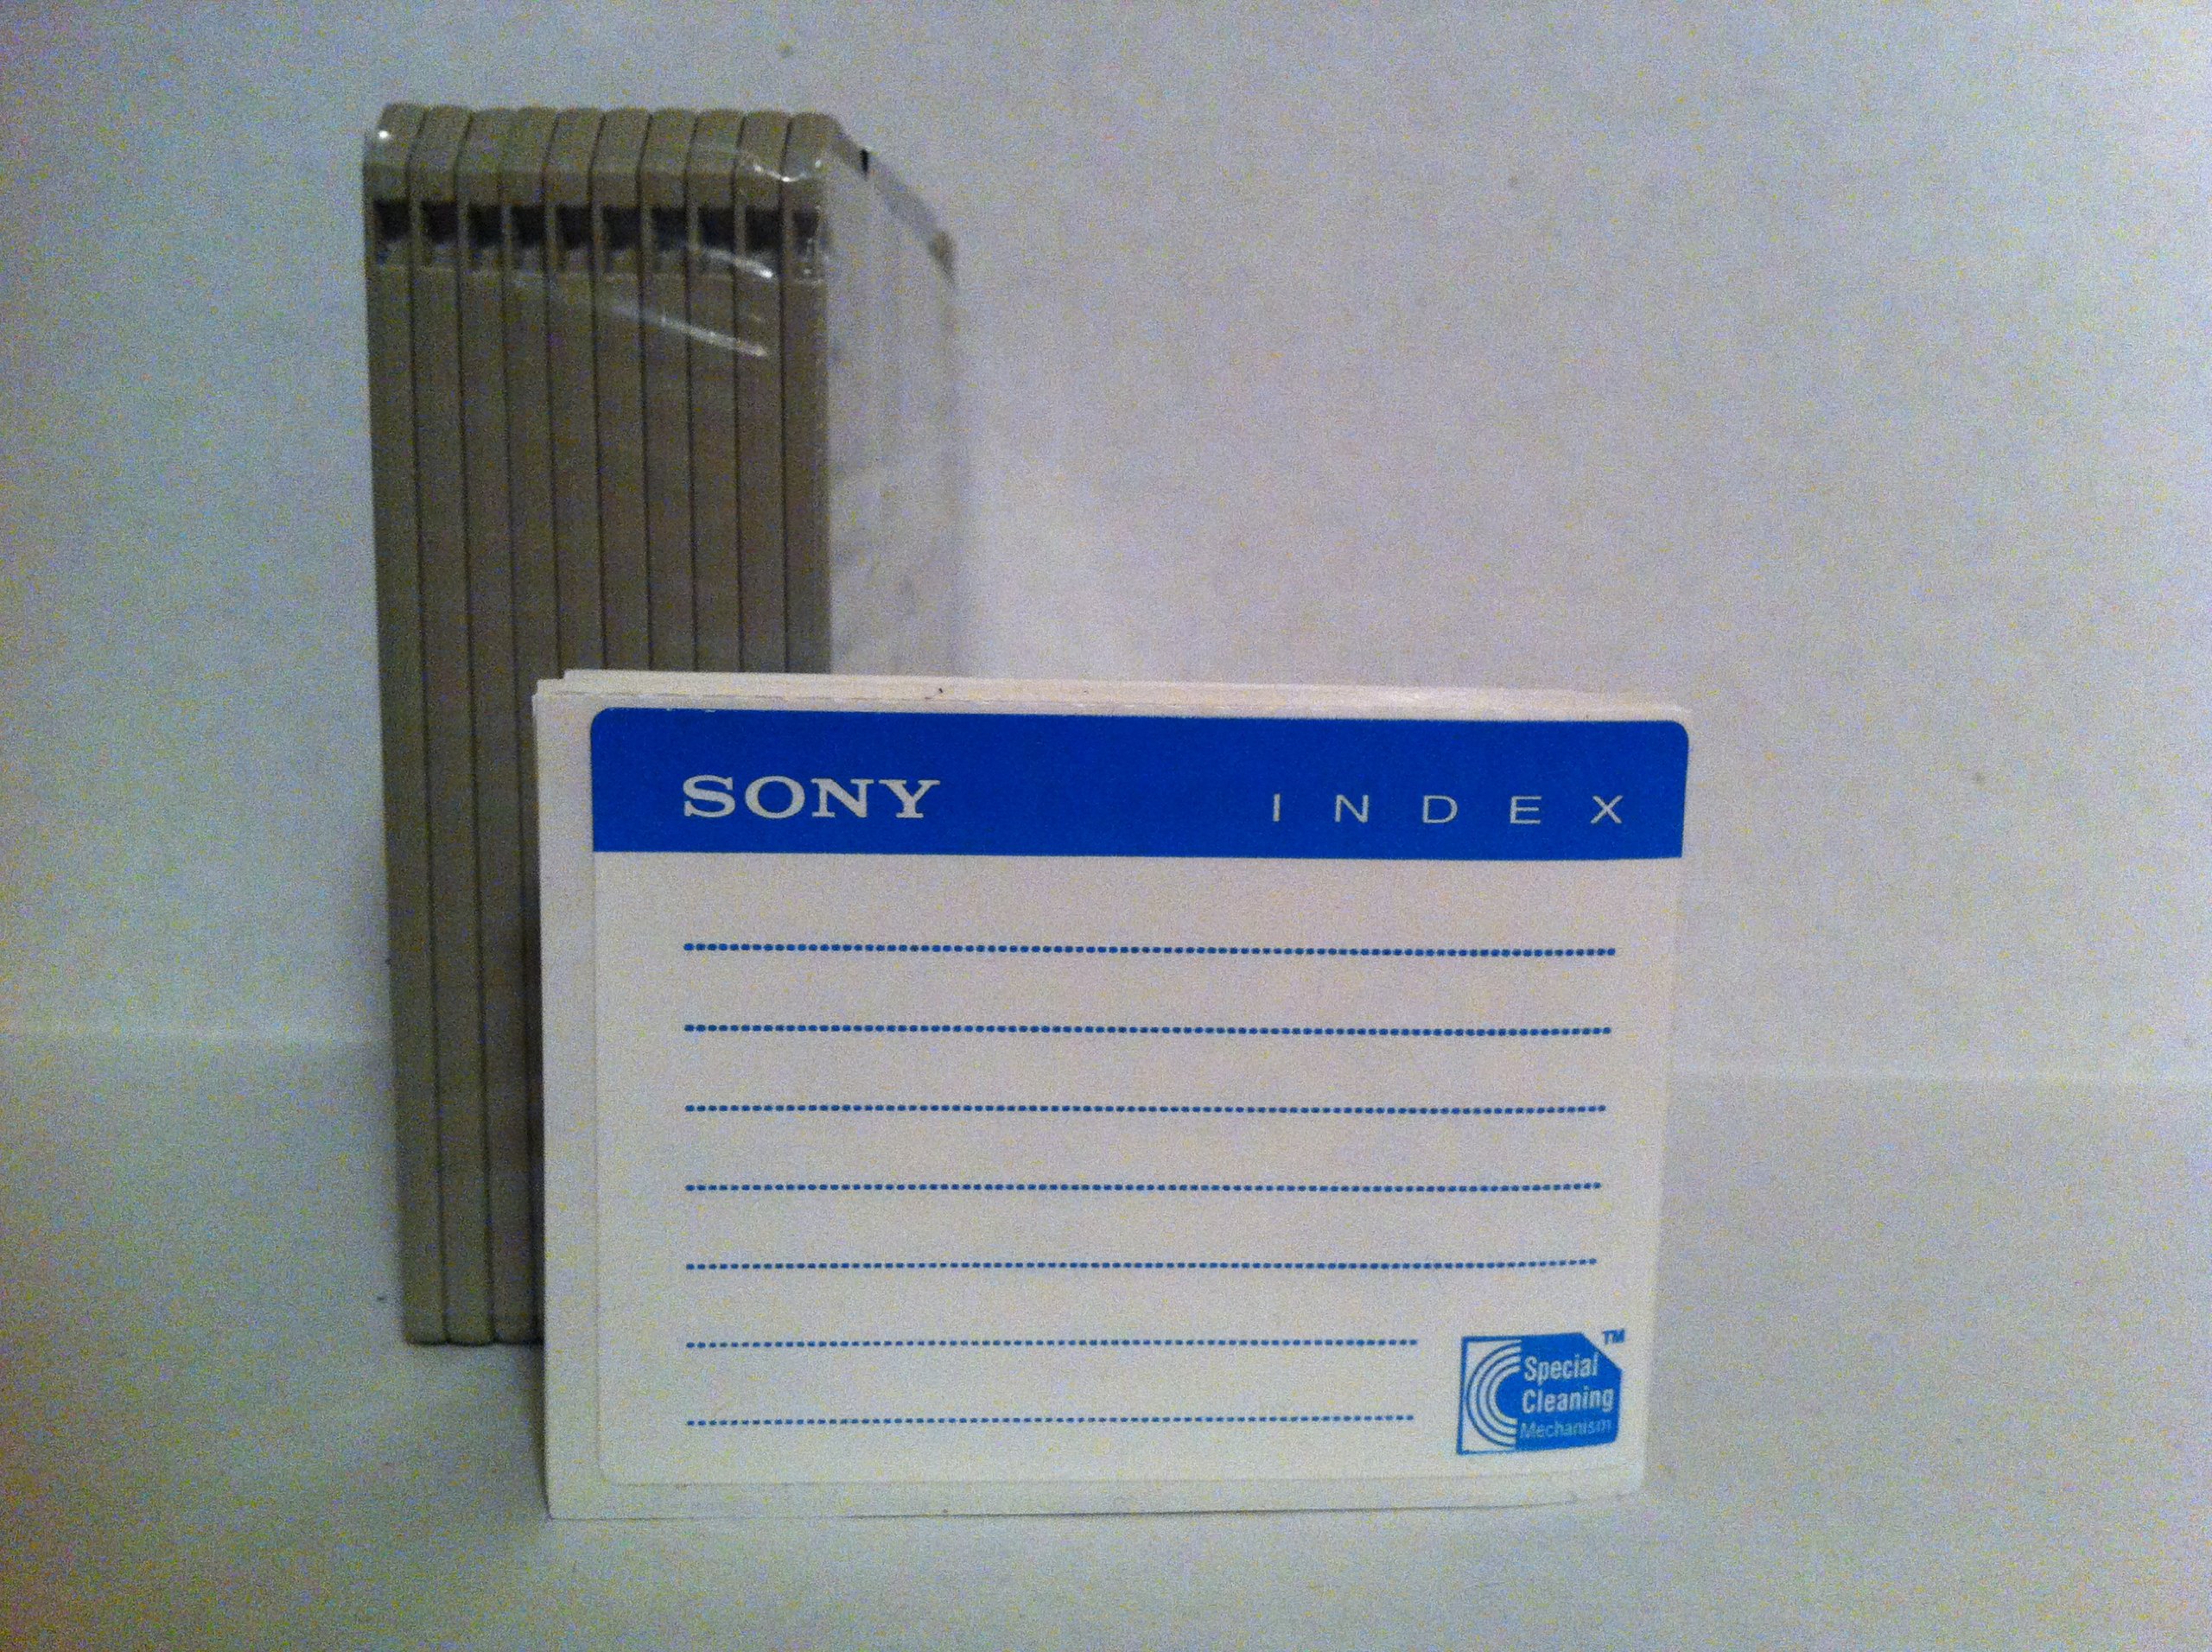 1995 Sony Electronics, Inc. Sony Micro Floppy Disk/double Sided 10mfd-2hdcf 10 Pack Blister Box Packagecapacity IBM Formatted 1.44 Mb 10 Packspecifications Trackes Per Inch 135 Tpi, Number of Tracks-80/side Double Side/high Densitycompatibility Is All Ibm